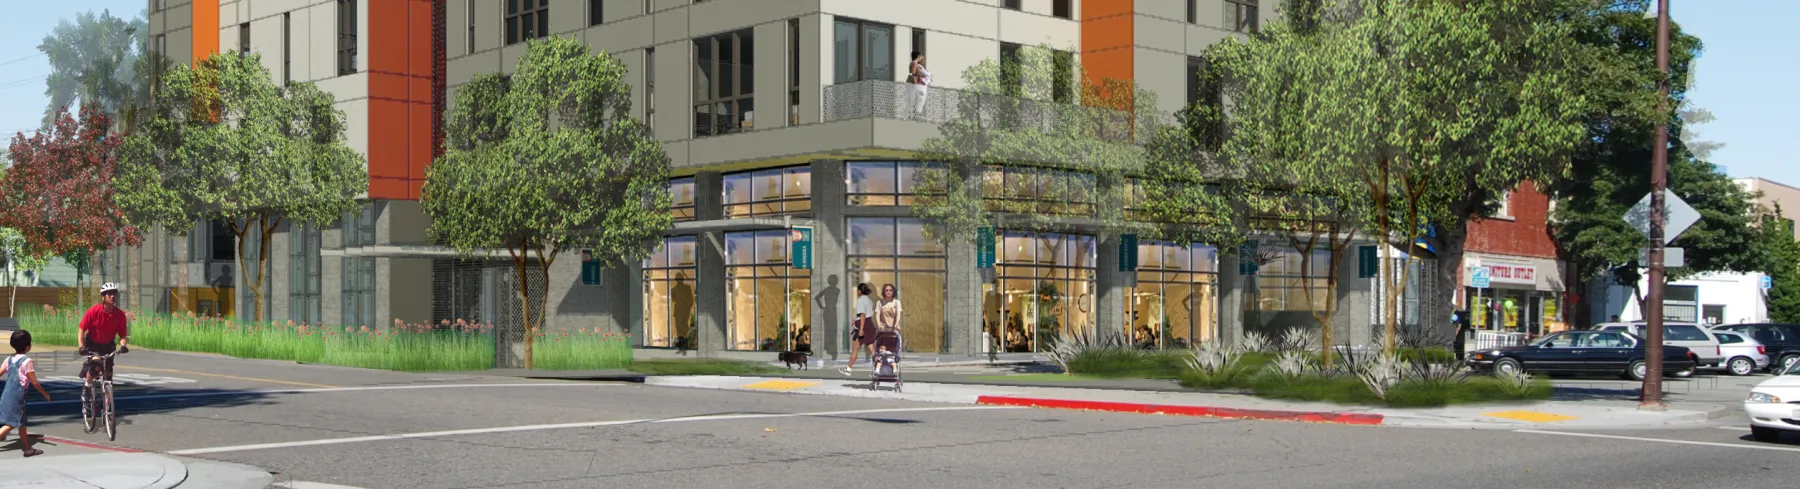 Exterior rendering of the retail spaces at Parker Place in Berkeley, California